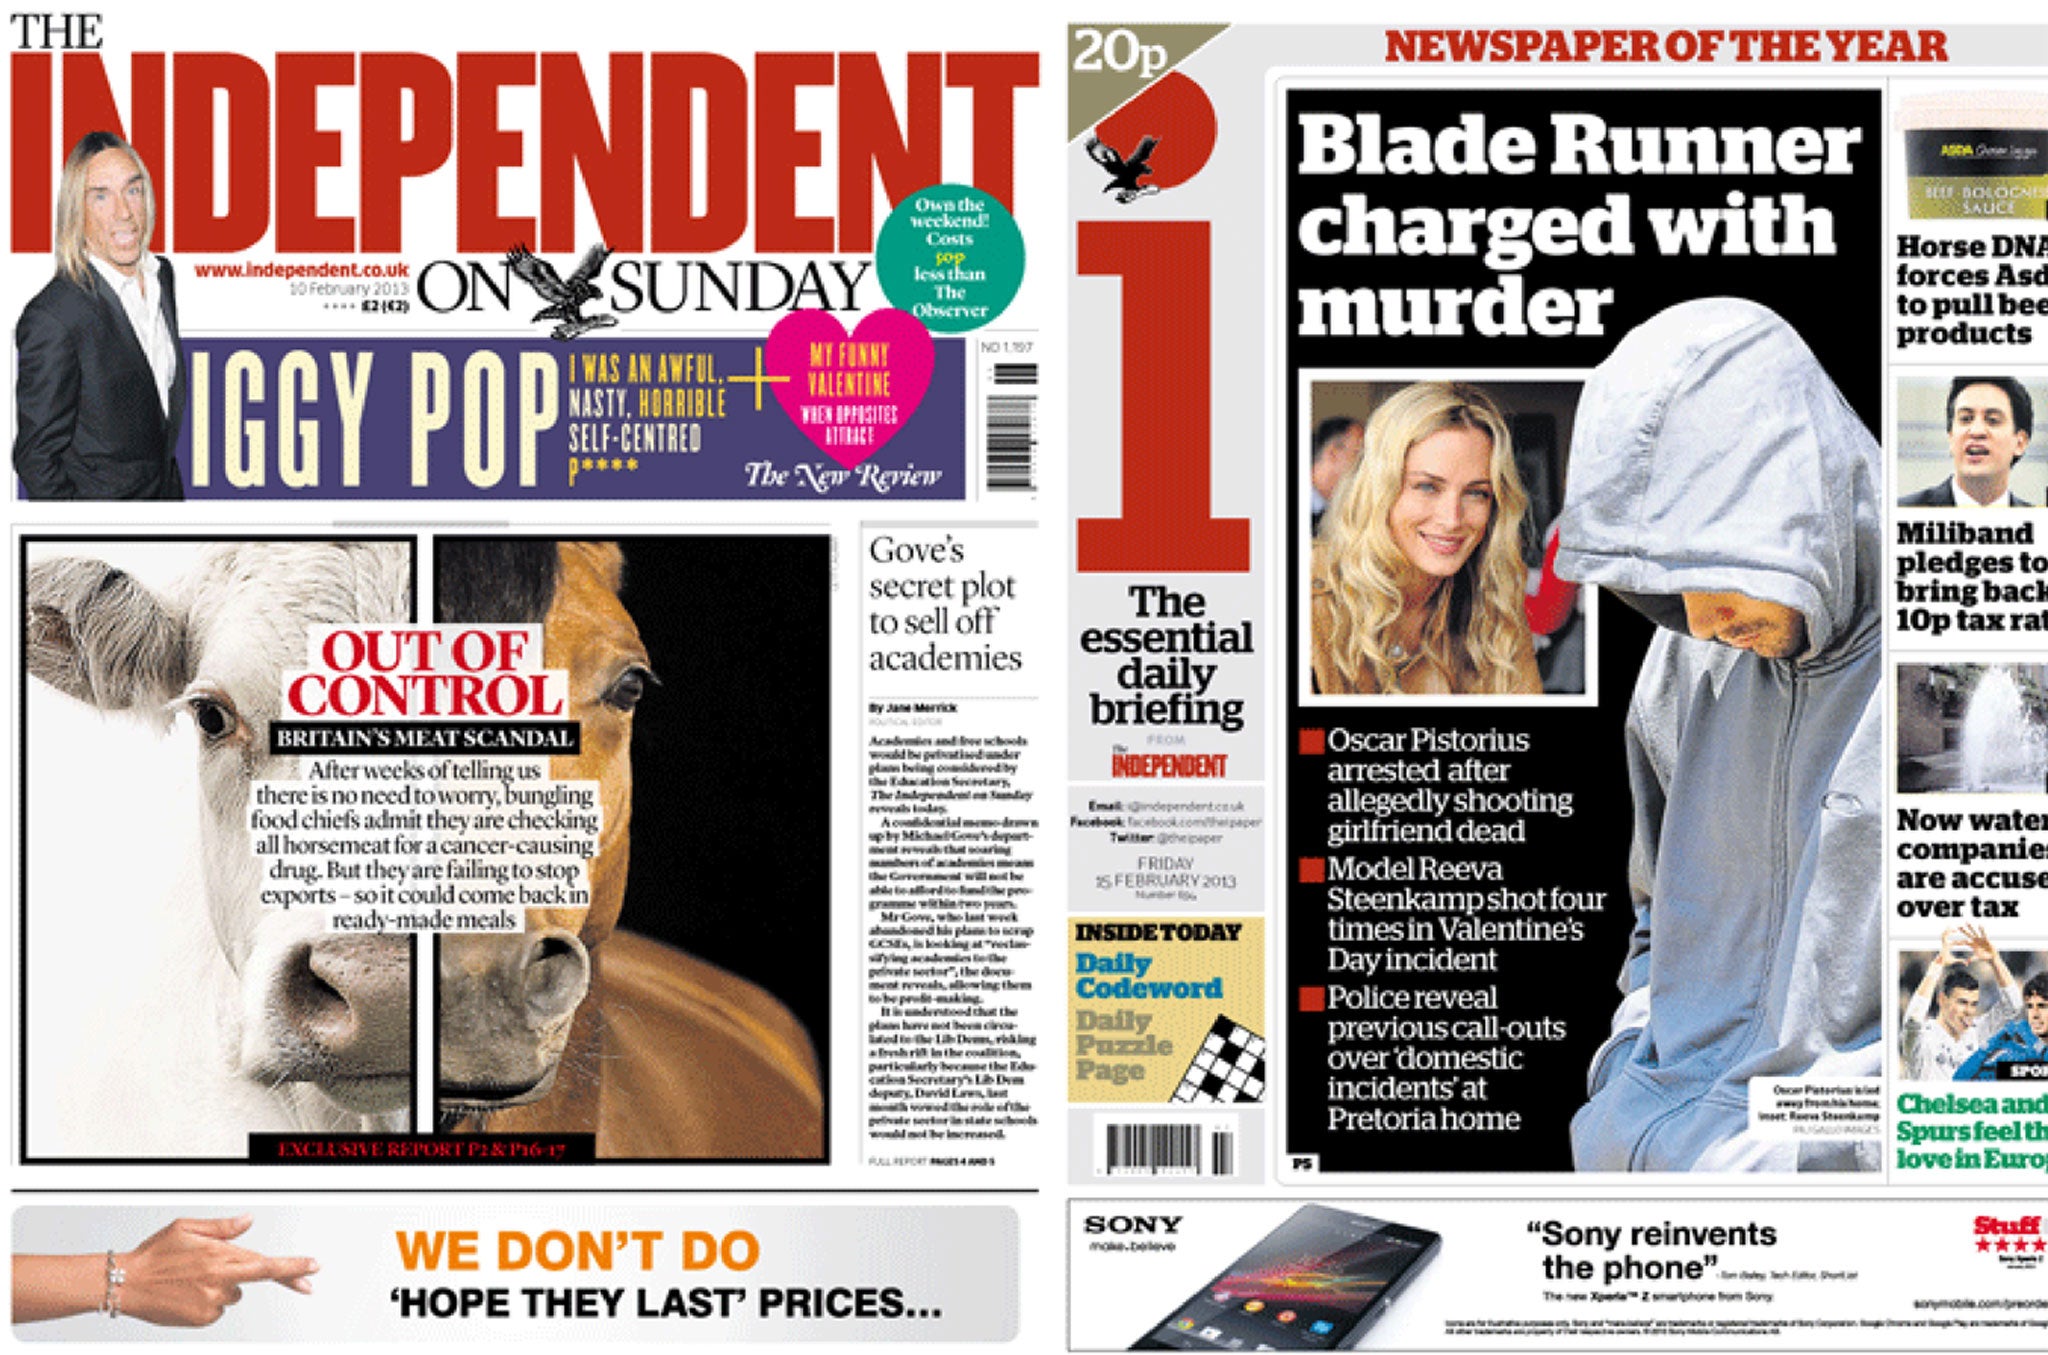 The Independent on Sunday's readership grew by 12 per cent to 547,000 while the i newspaper now has 612,000 readers